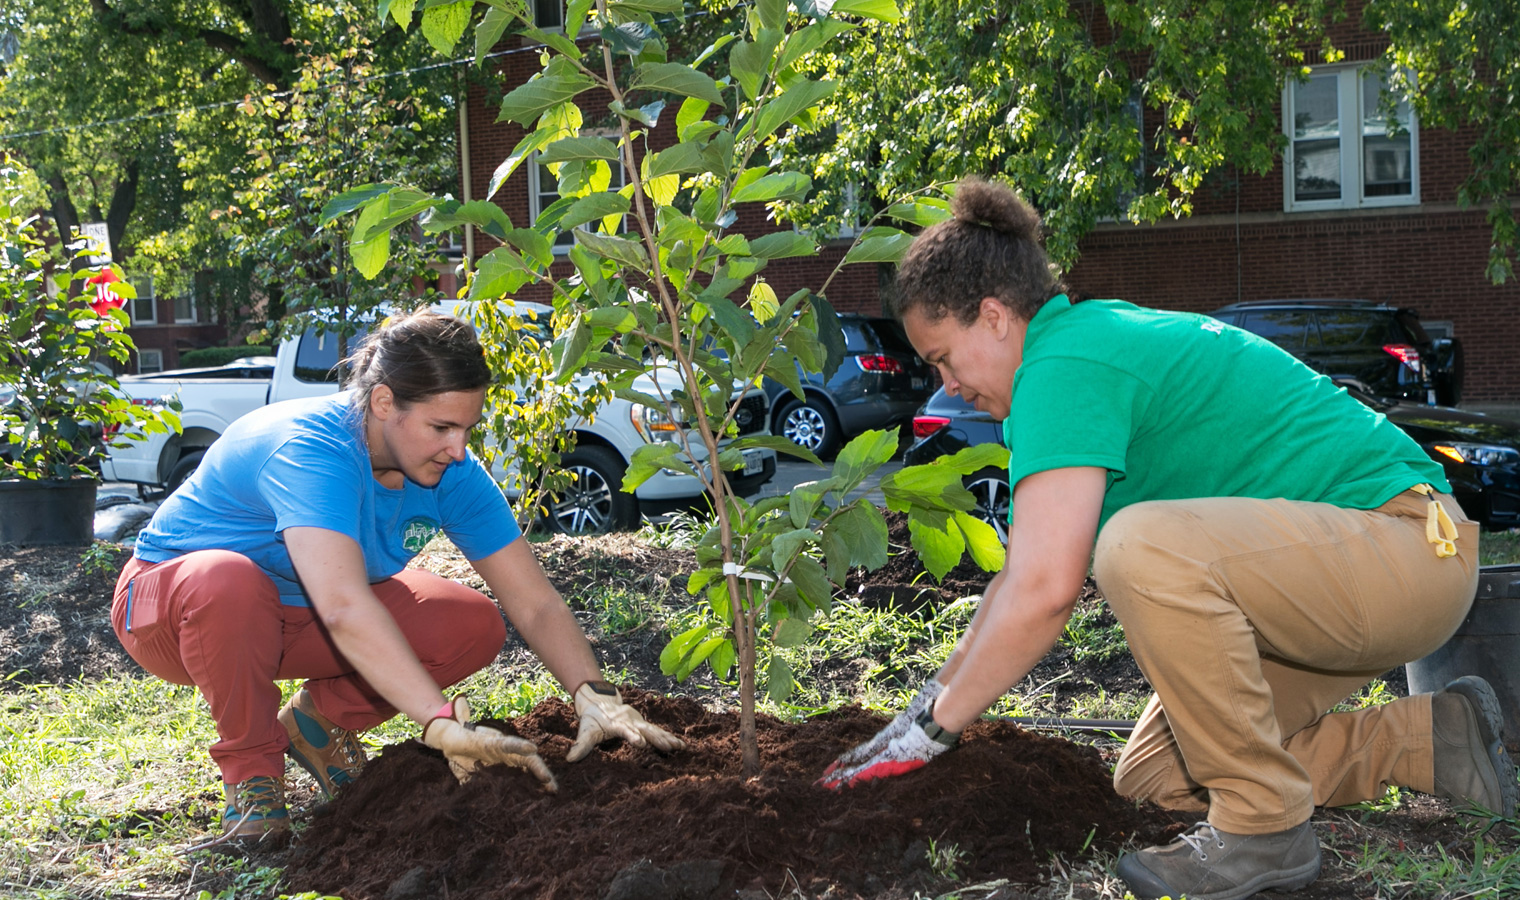 Chicago Region Trees Initiative staff plant trees in needed areas throughout Chicago